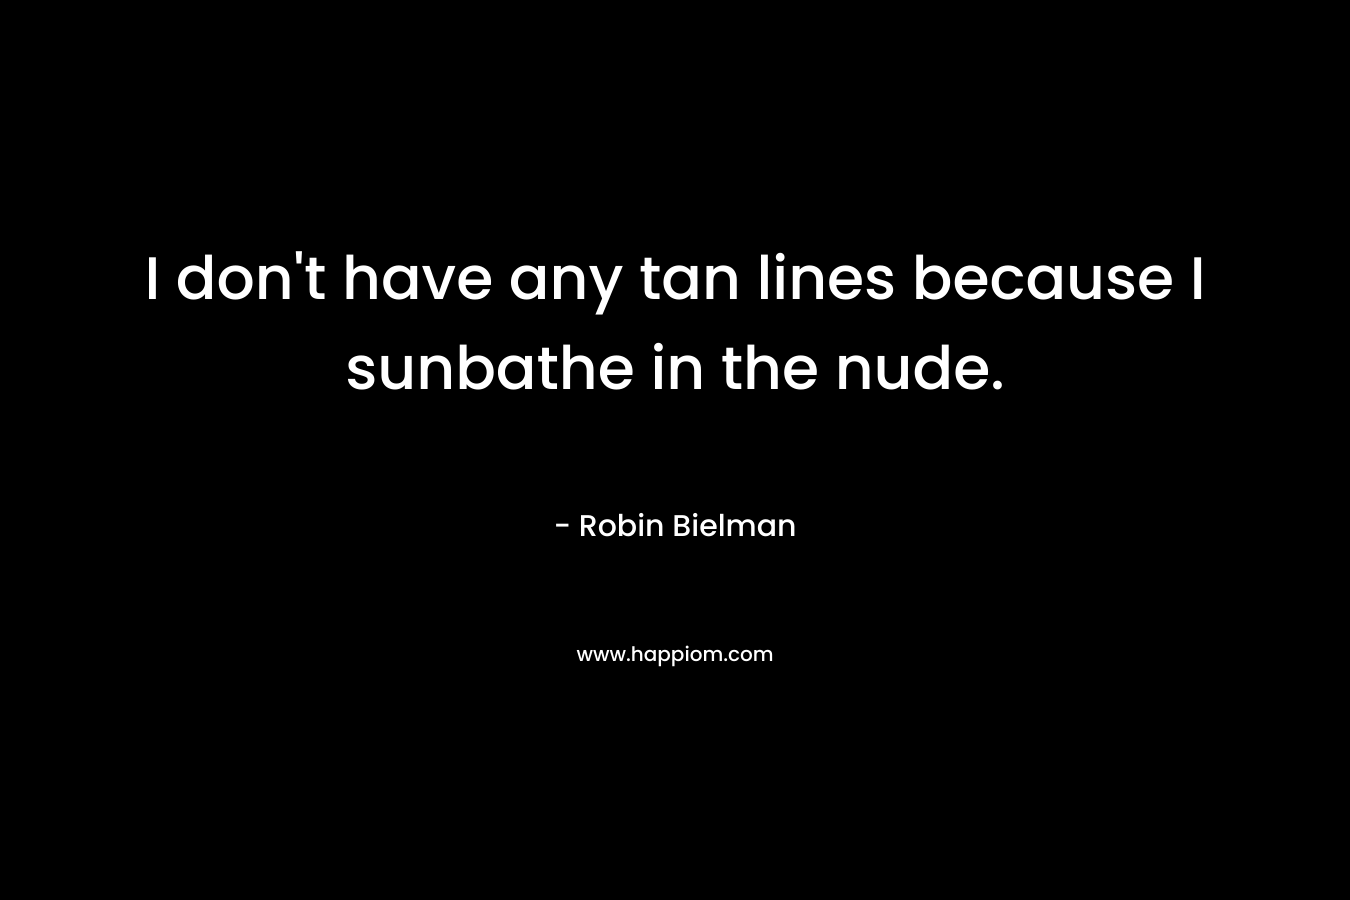 I don’t have any tan lines because I sunbathe in the nude. – Robin Bielman